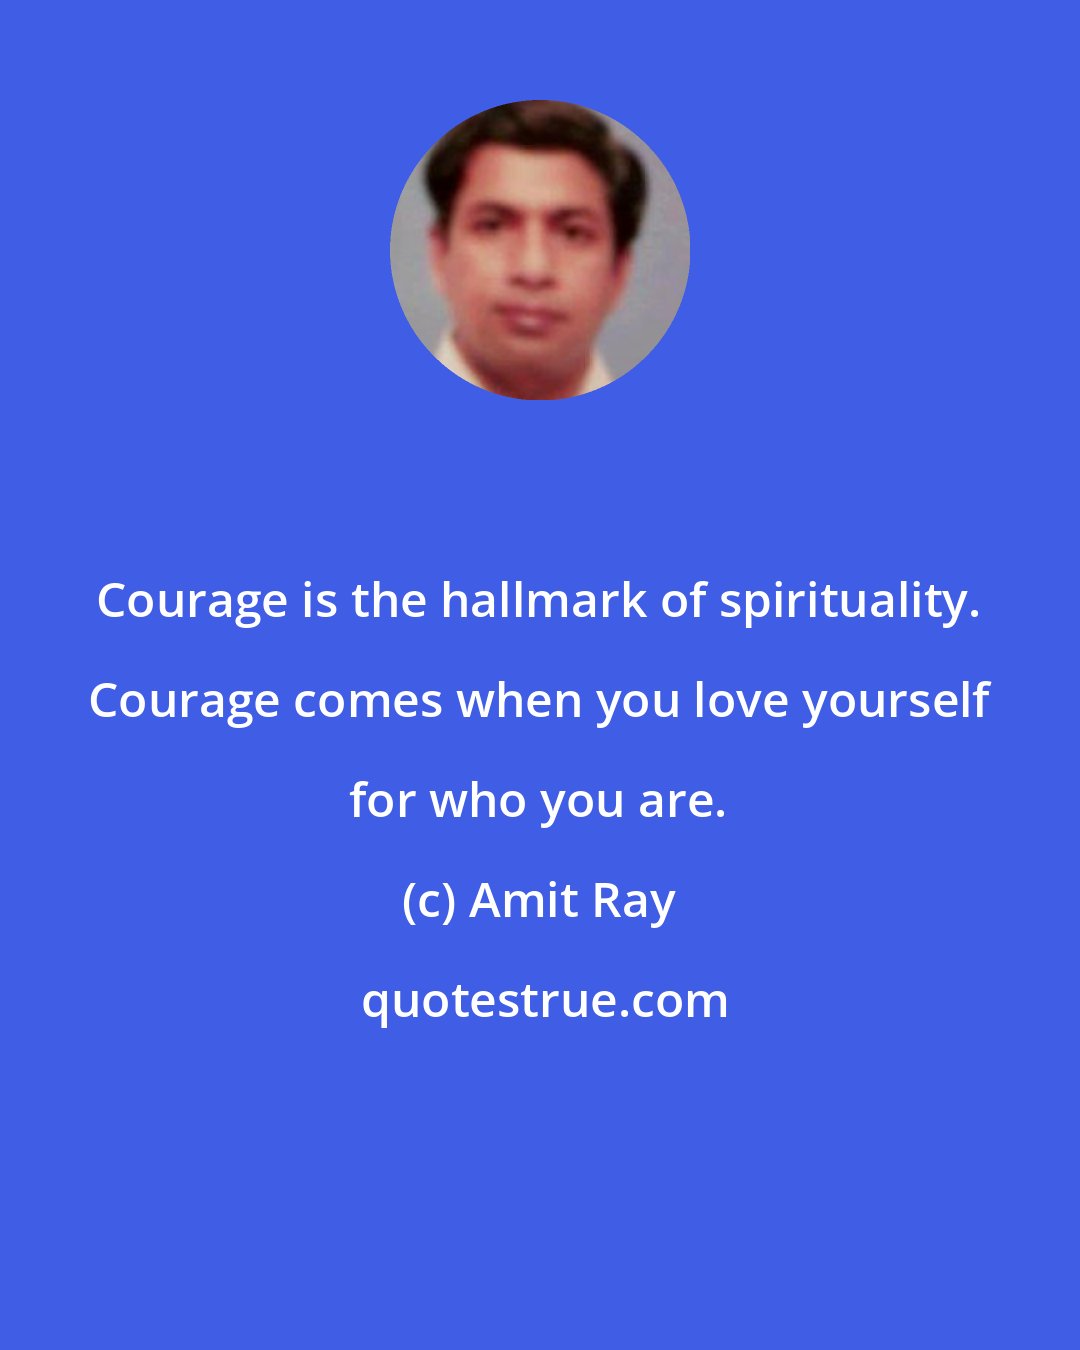 Amit Ray: Courage is the hallmark of spirituality. Courage comes when you love yourself for who you are.